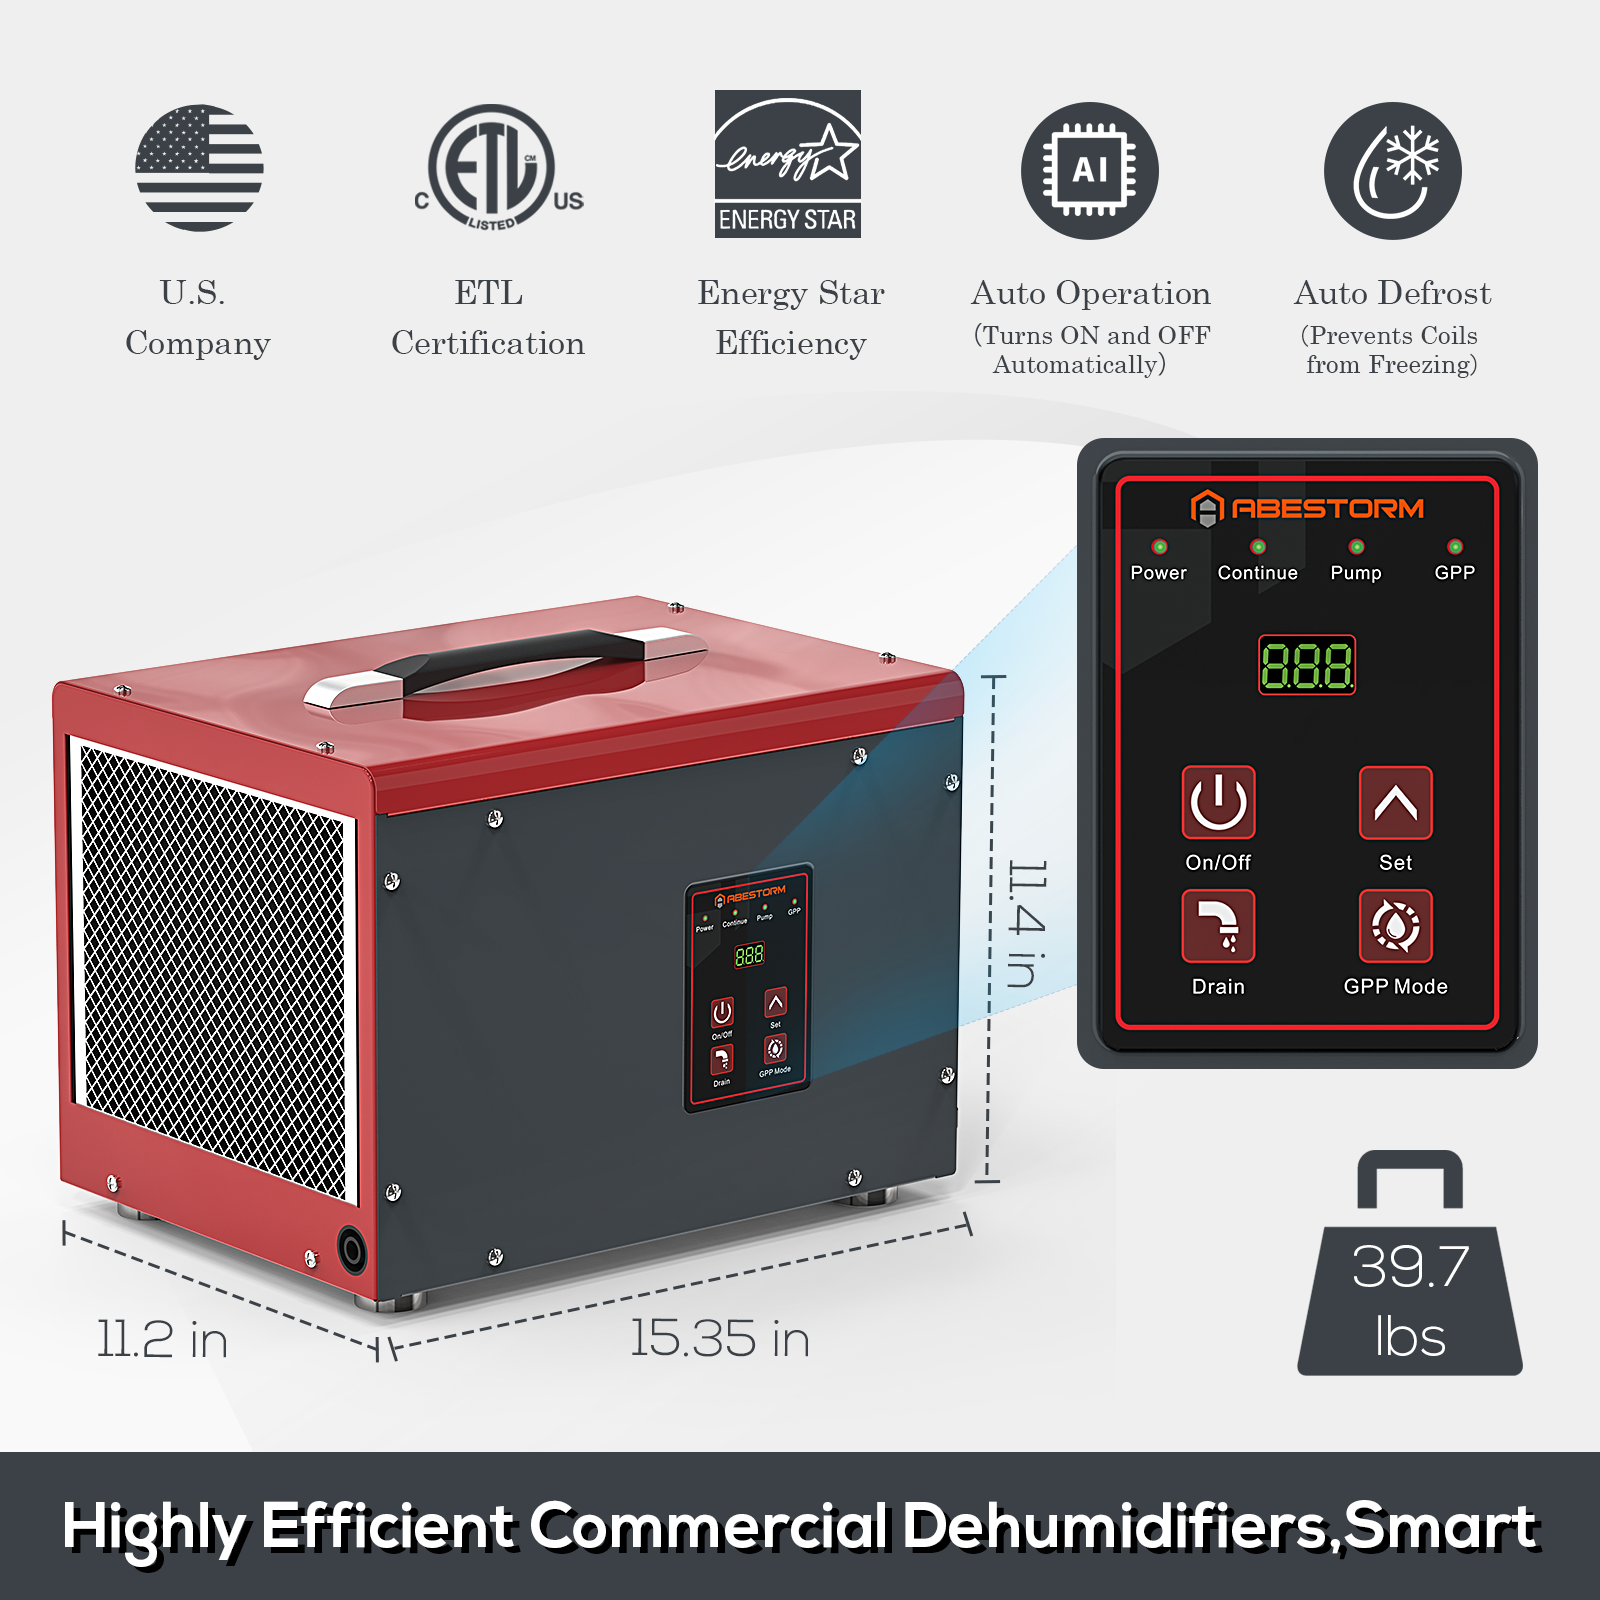 Highly Efficient Commercial Dehumidifiers